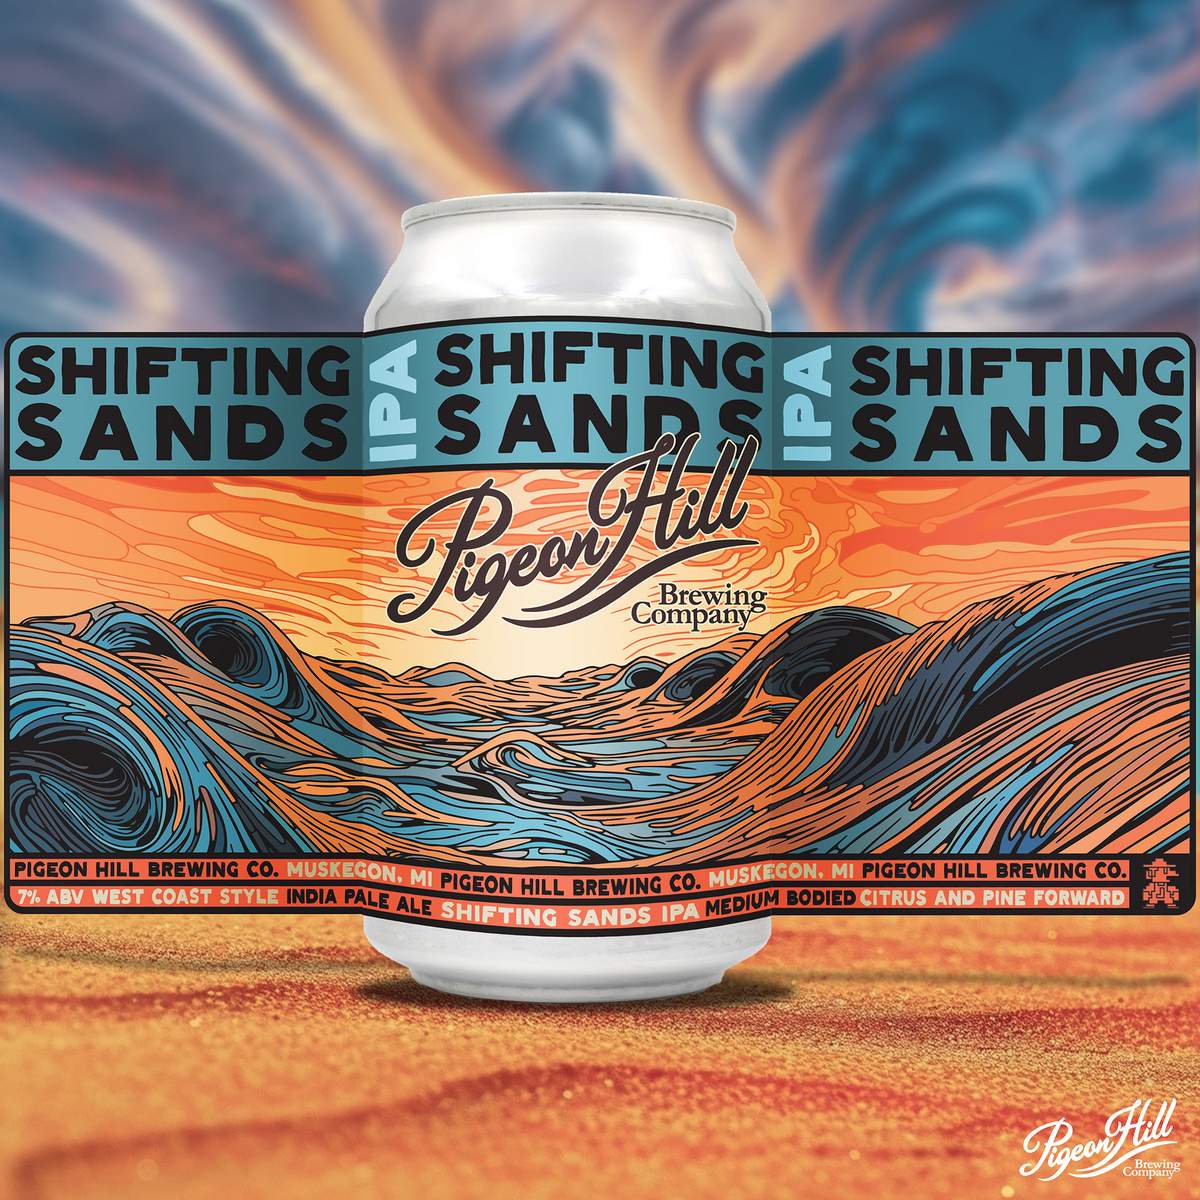 Pigeon Hill Brewing Co Shifting Sands IPA label